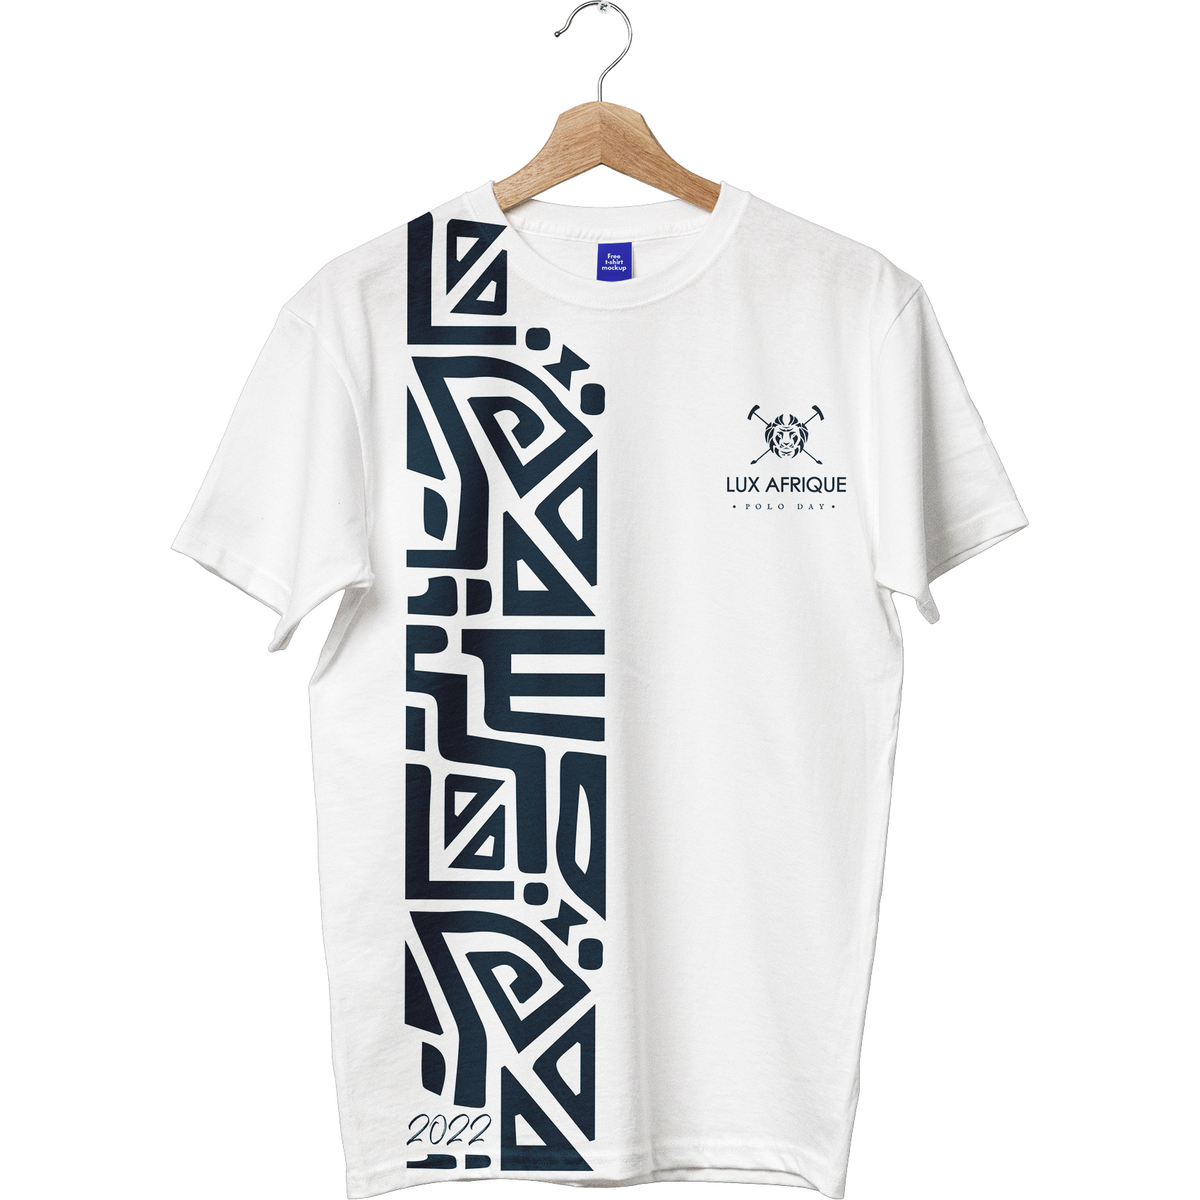 Lux Afrique Polo Day Merchandise Polo Shirt 2022